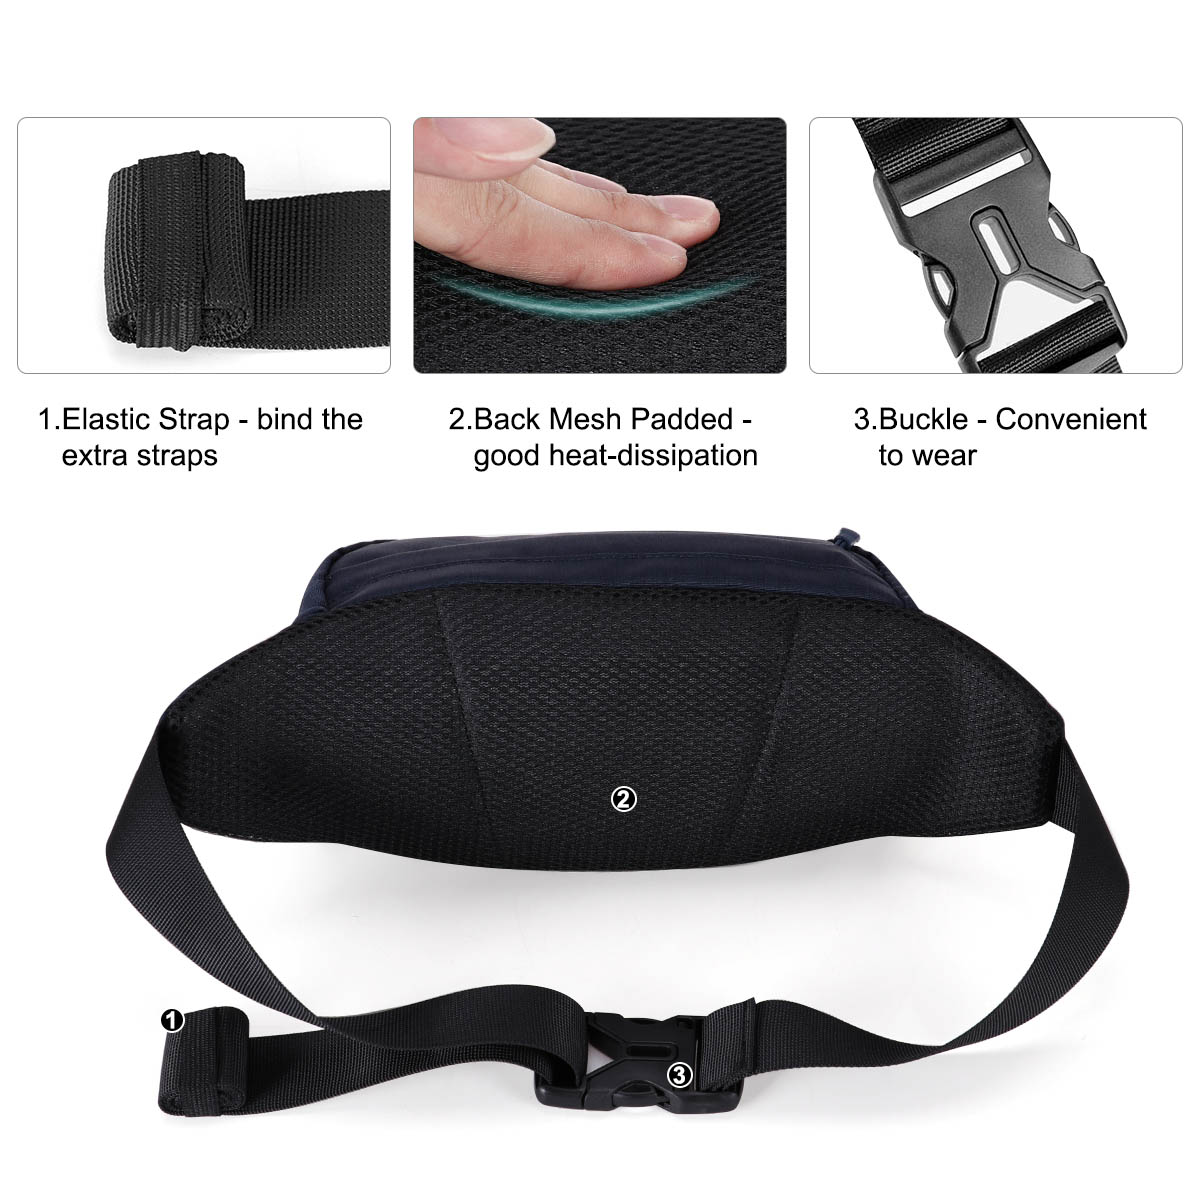 HAWEE Unisex Fanny Pack-Crossbody Sling Backpack Running Waist Pack Belt Hip Bag for Travel Sport Hiking Cycling - image 3 of 6